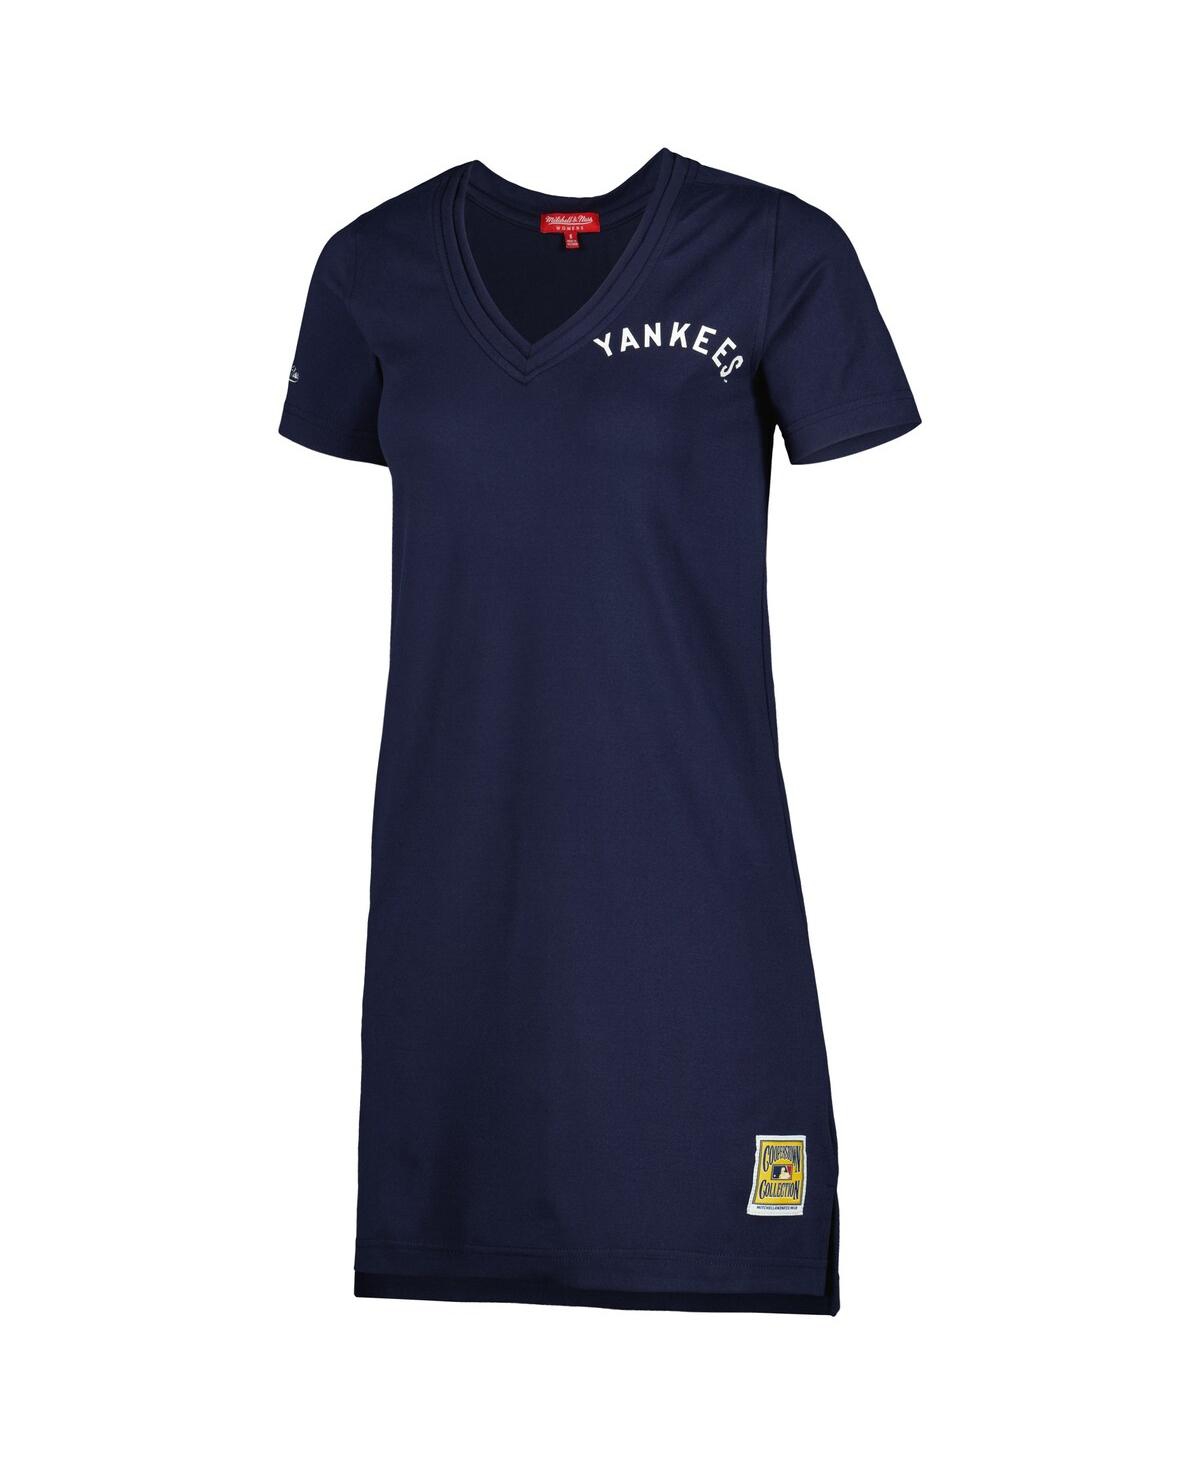 Shop Mitchell & Ness Women's  Navy Distressed New York Yankees Cooperstown Collection V-neck Dress